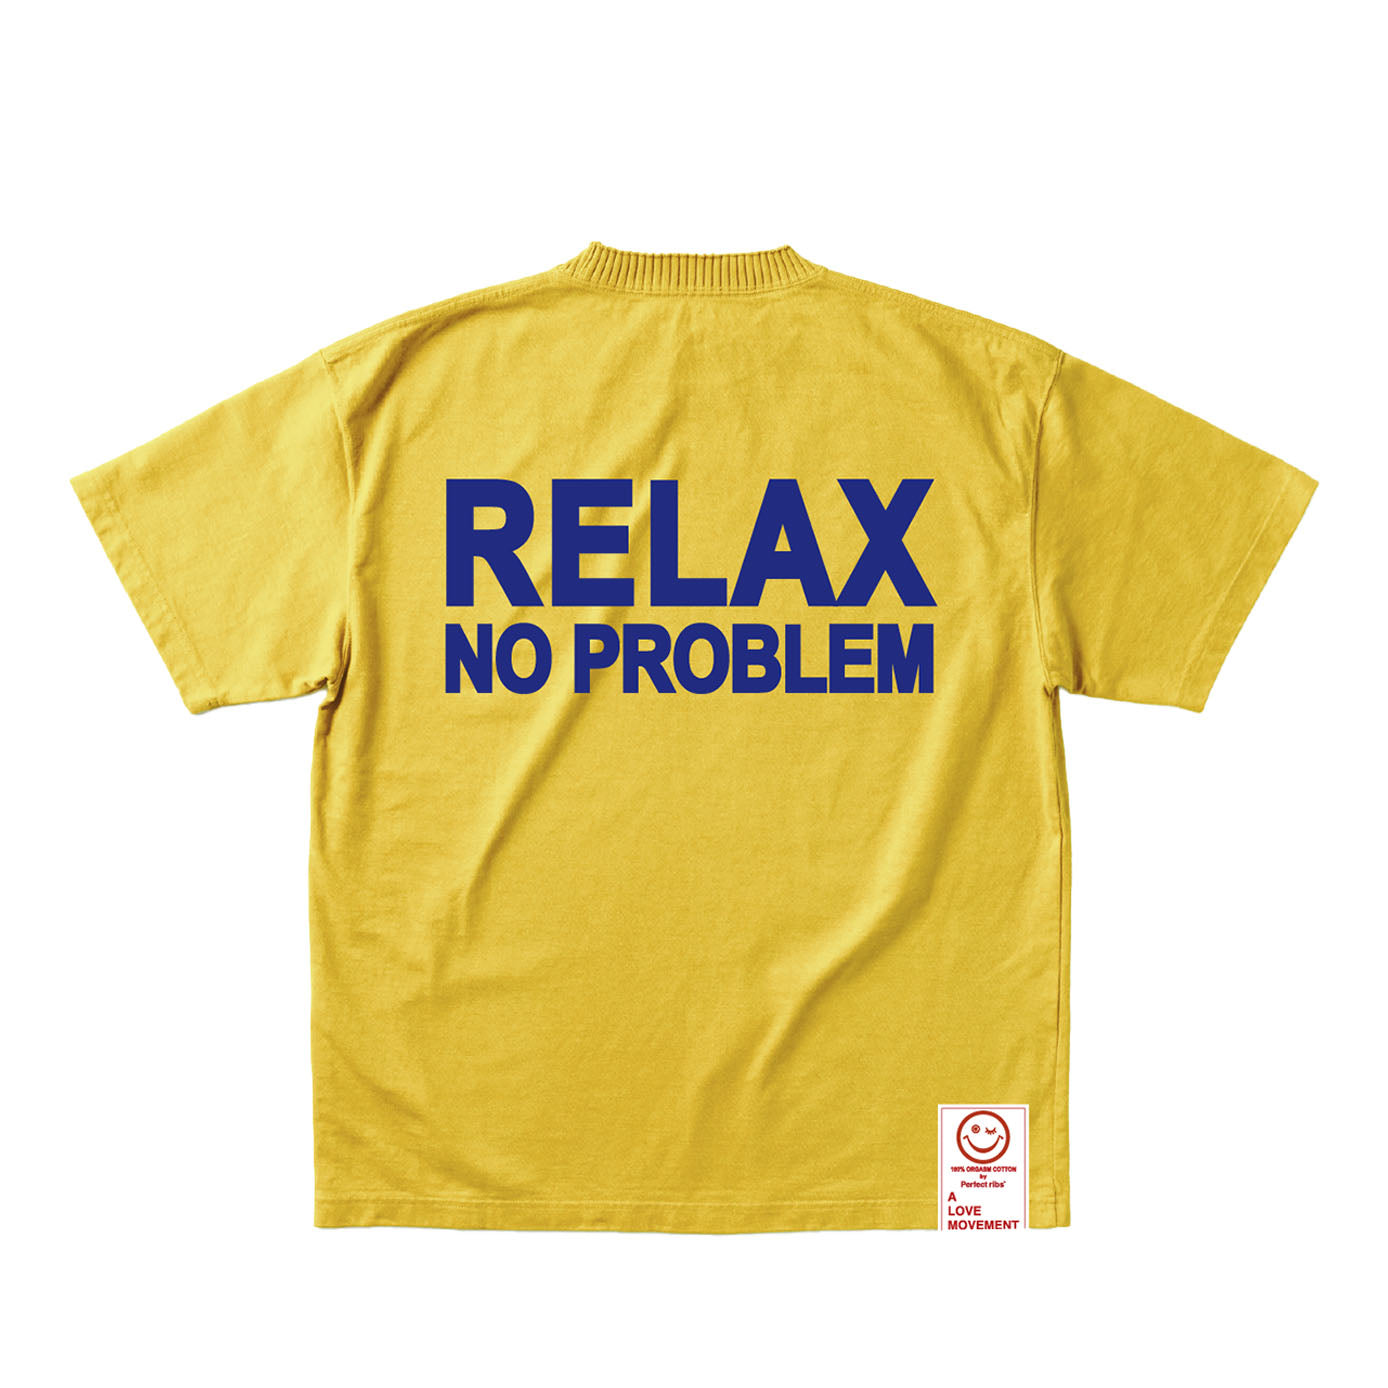 【Perfect ribs®︎×A LOVE MOVEMENT】"RELAX NO PROBLEM"Basic Short Sleeve T Shirts /Vintage Yellow (ベーシック ショートスリーブ ティーシャツ/ヴィンテージイエロー)